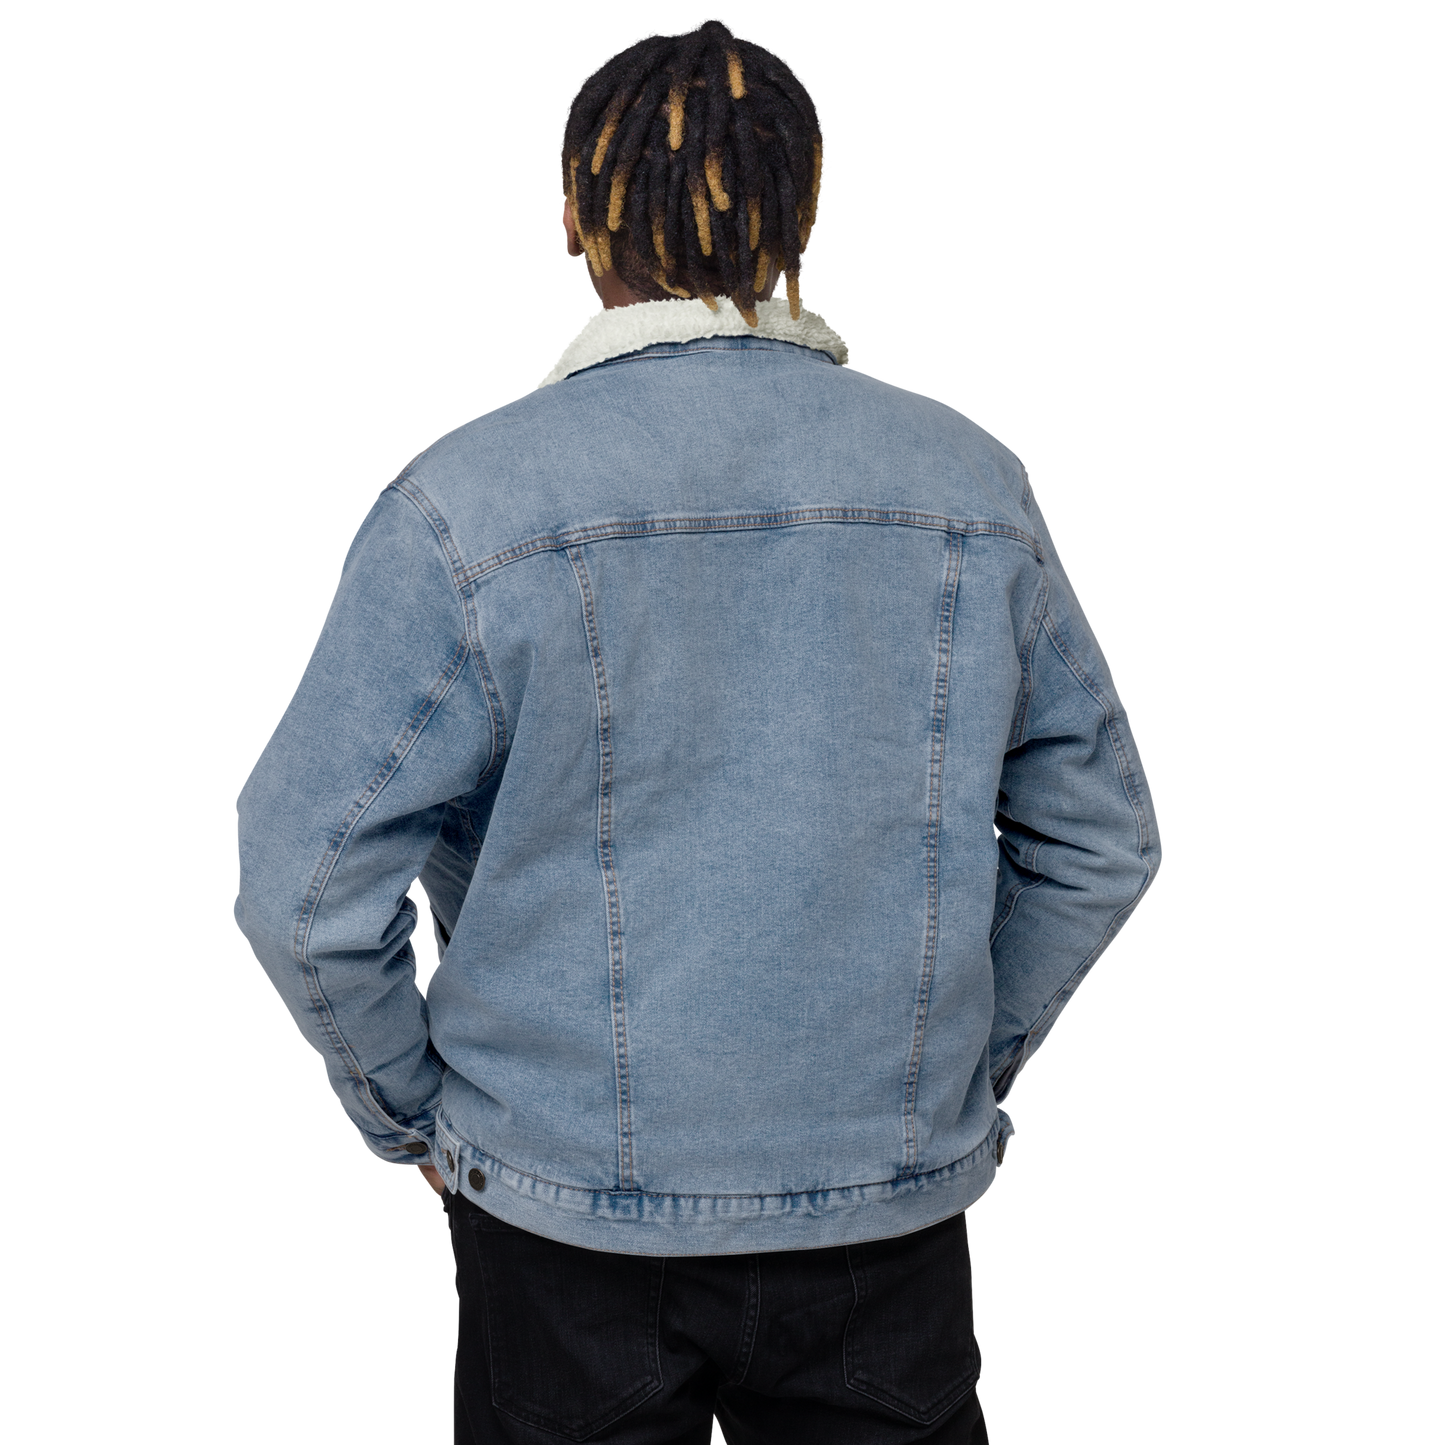 YHM Designs - YHM Hamilton Denim Sherpa Jacket - Crossed-X Design with Airport Code and Vintage Propliner - Black & White Embroidery - Image 12